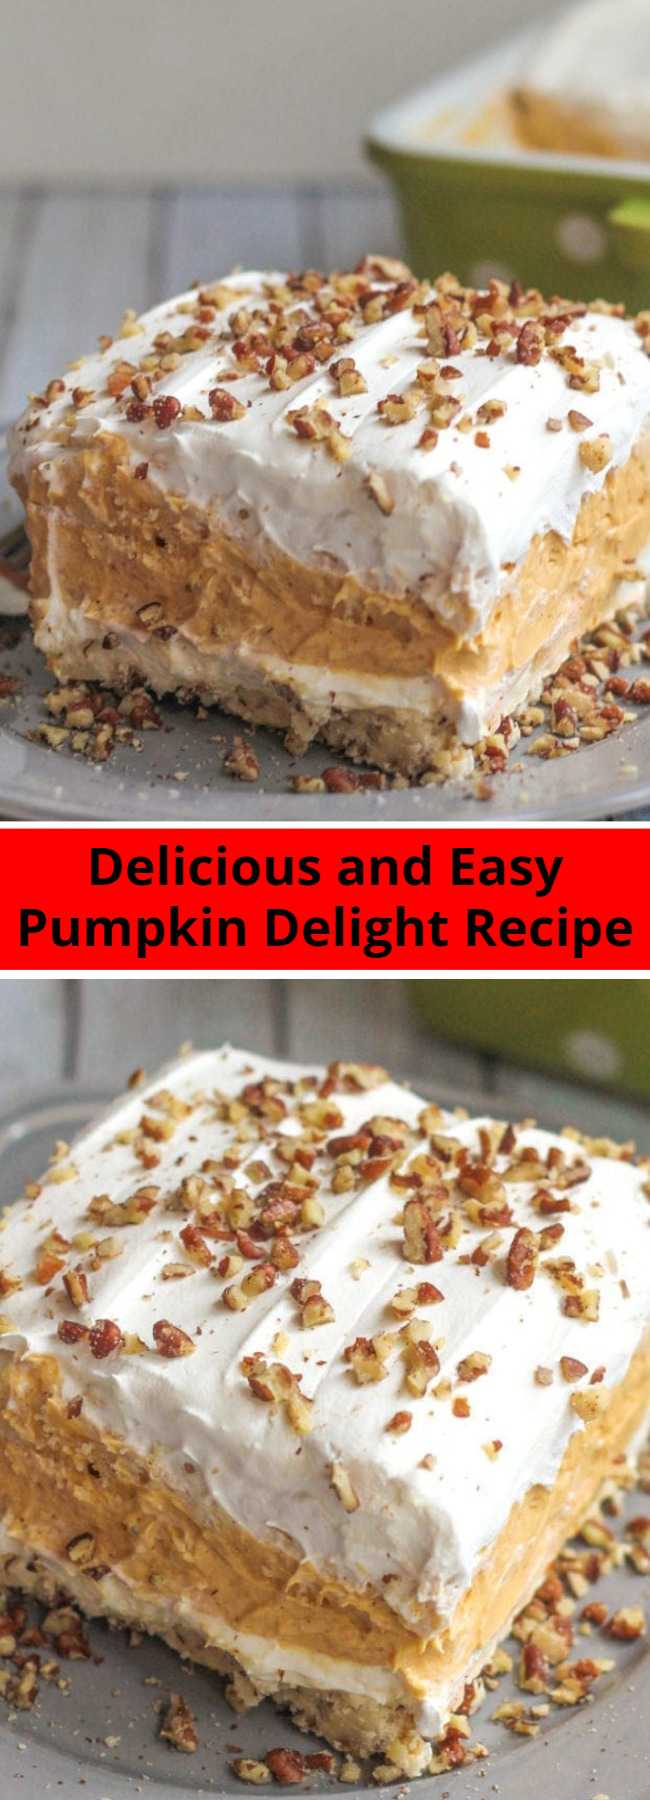 Delicious and Easy Pumpkin Delight Recipe - With A Buttery Pecan Crust, A Whipped Cream Cheese Layer, Light And Fluffy Pumpkin Spice Pudding, And More Whipped Cream Topped Off With Chopped Pecans, This Pumpkin Delight Dessert Is Absolutely Irresistible! They all make great Thanksgiving desserts.